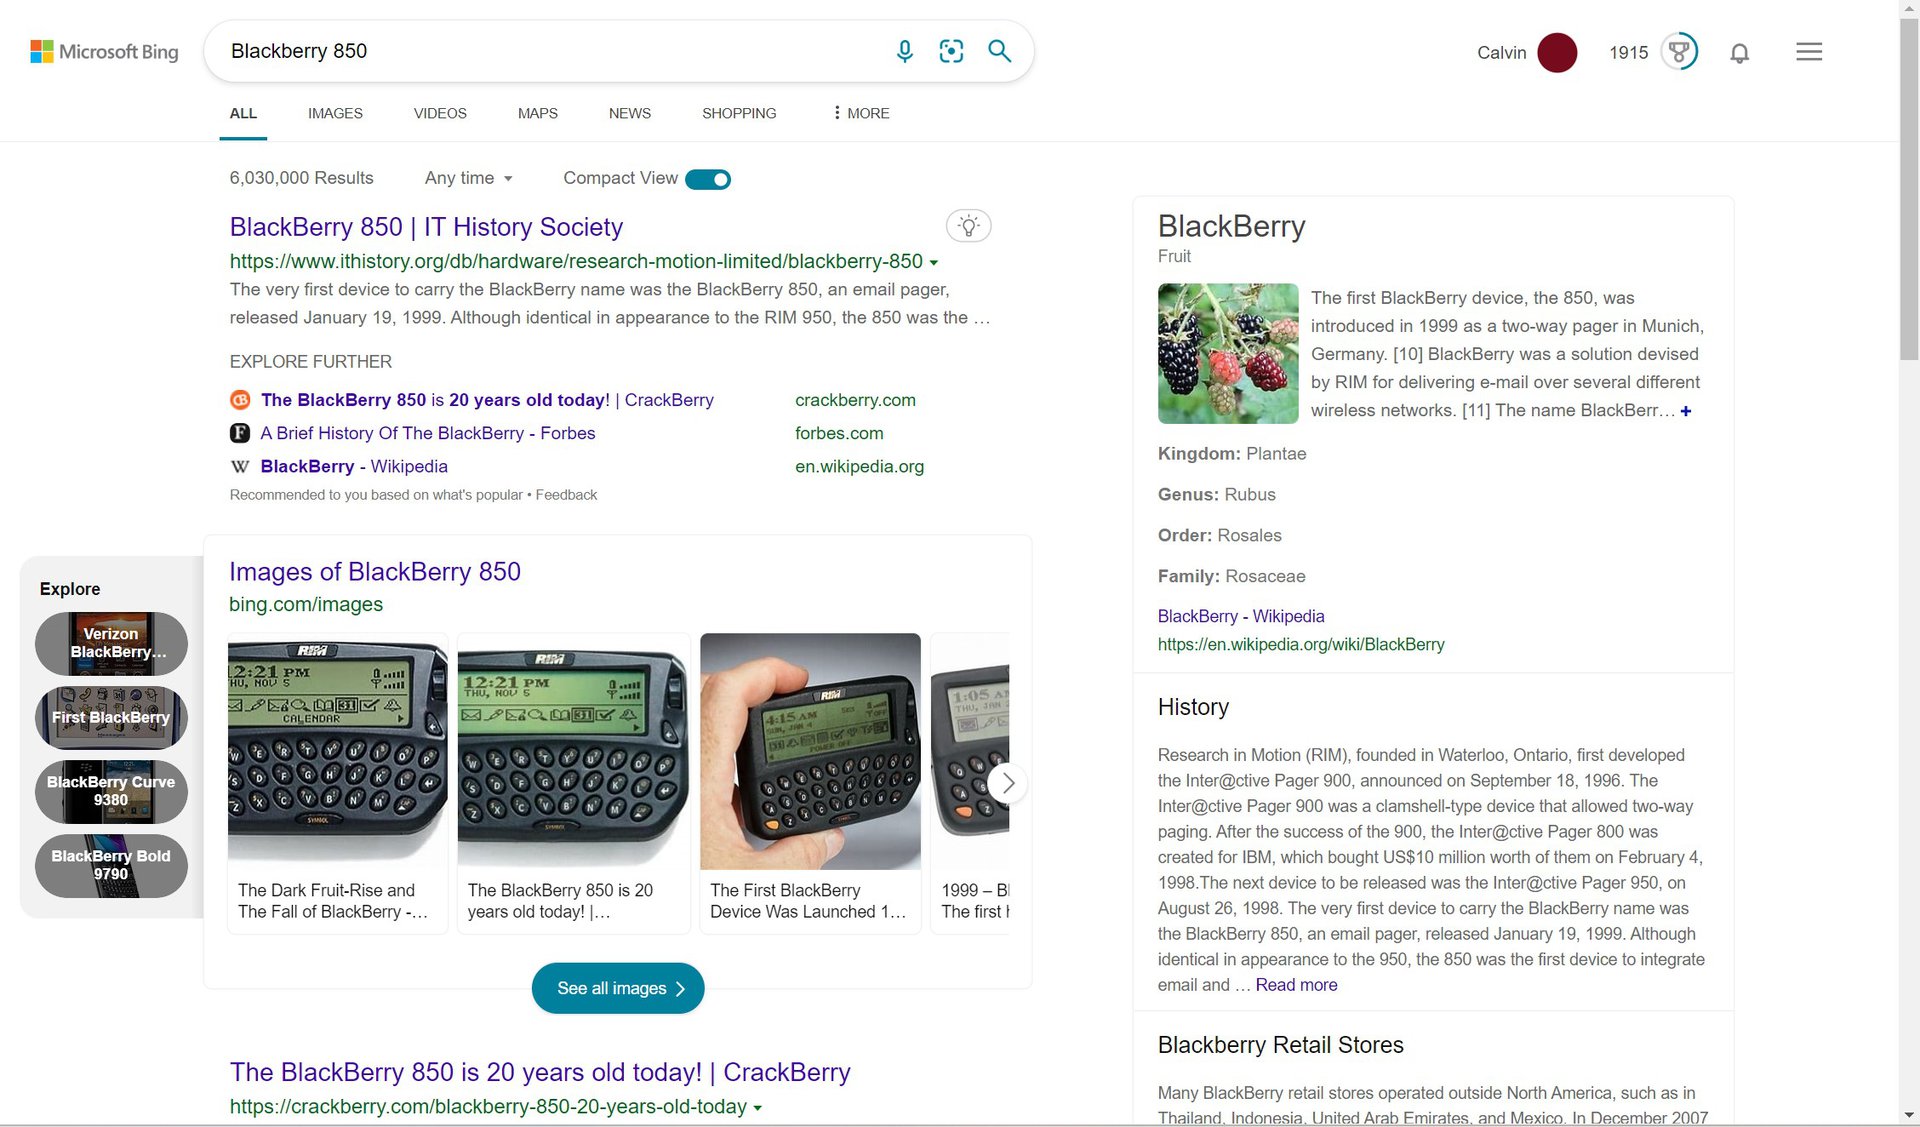 bing labels blackberry as a fruit, but describes it as a phone later in the info box.